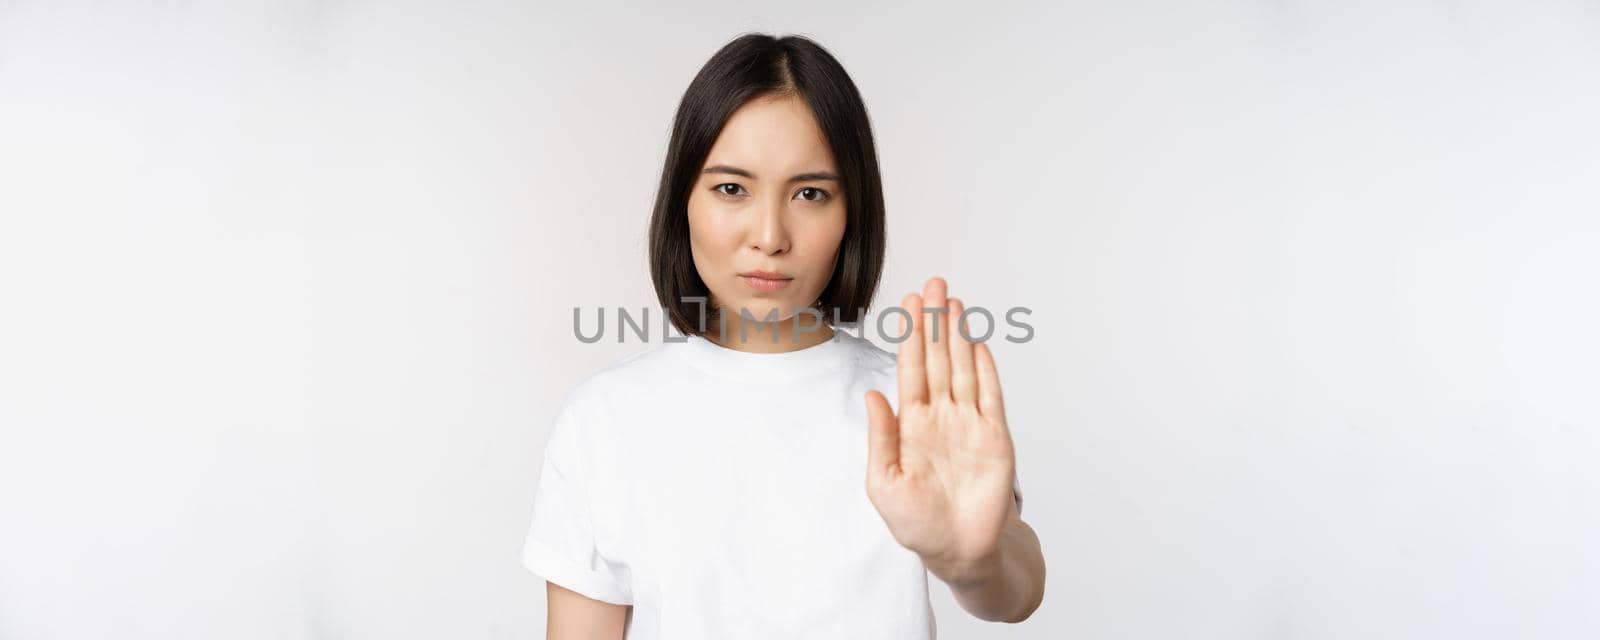 Image of asian girl showing stop, prohibit smth, extend one arm to show forbidding, taboo gesture, standing in tshirt over white background.